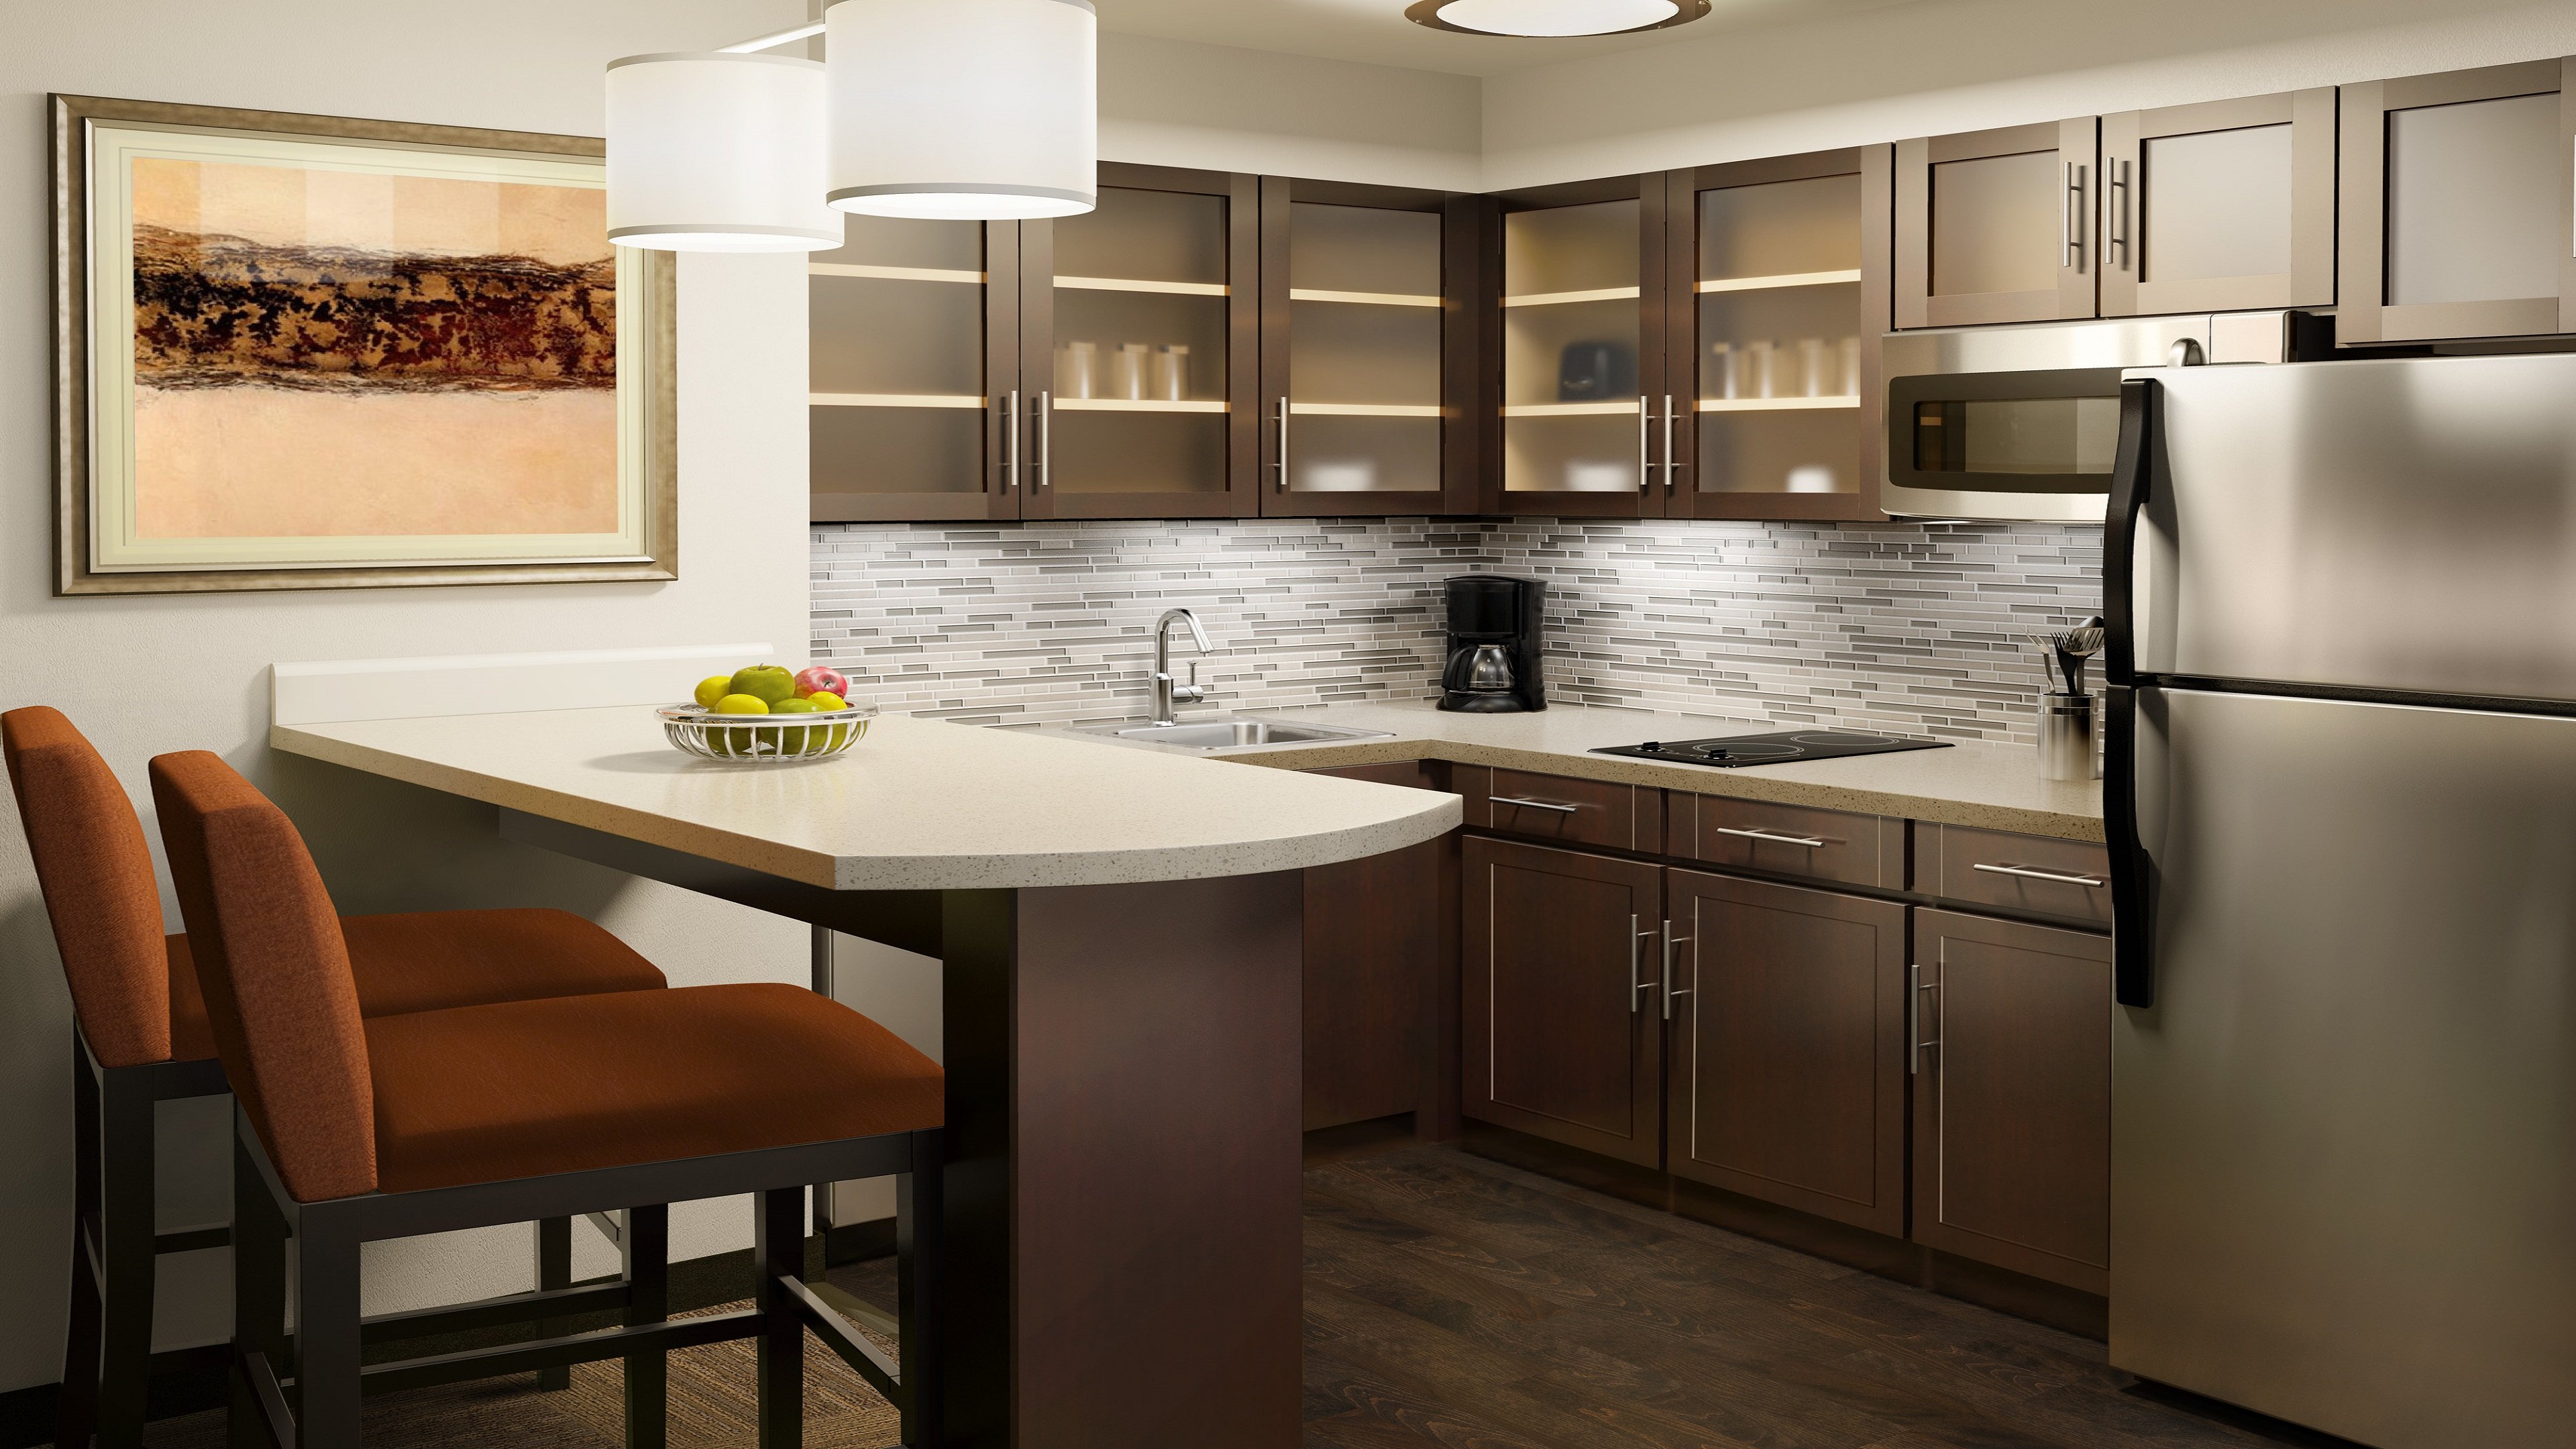 One Bedroom Suite Kitchen - Actual Kitchen Configurations May Vary